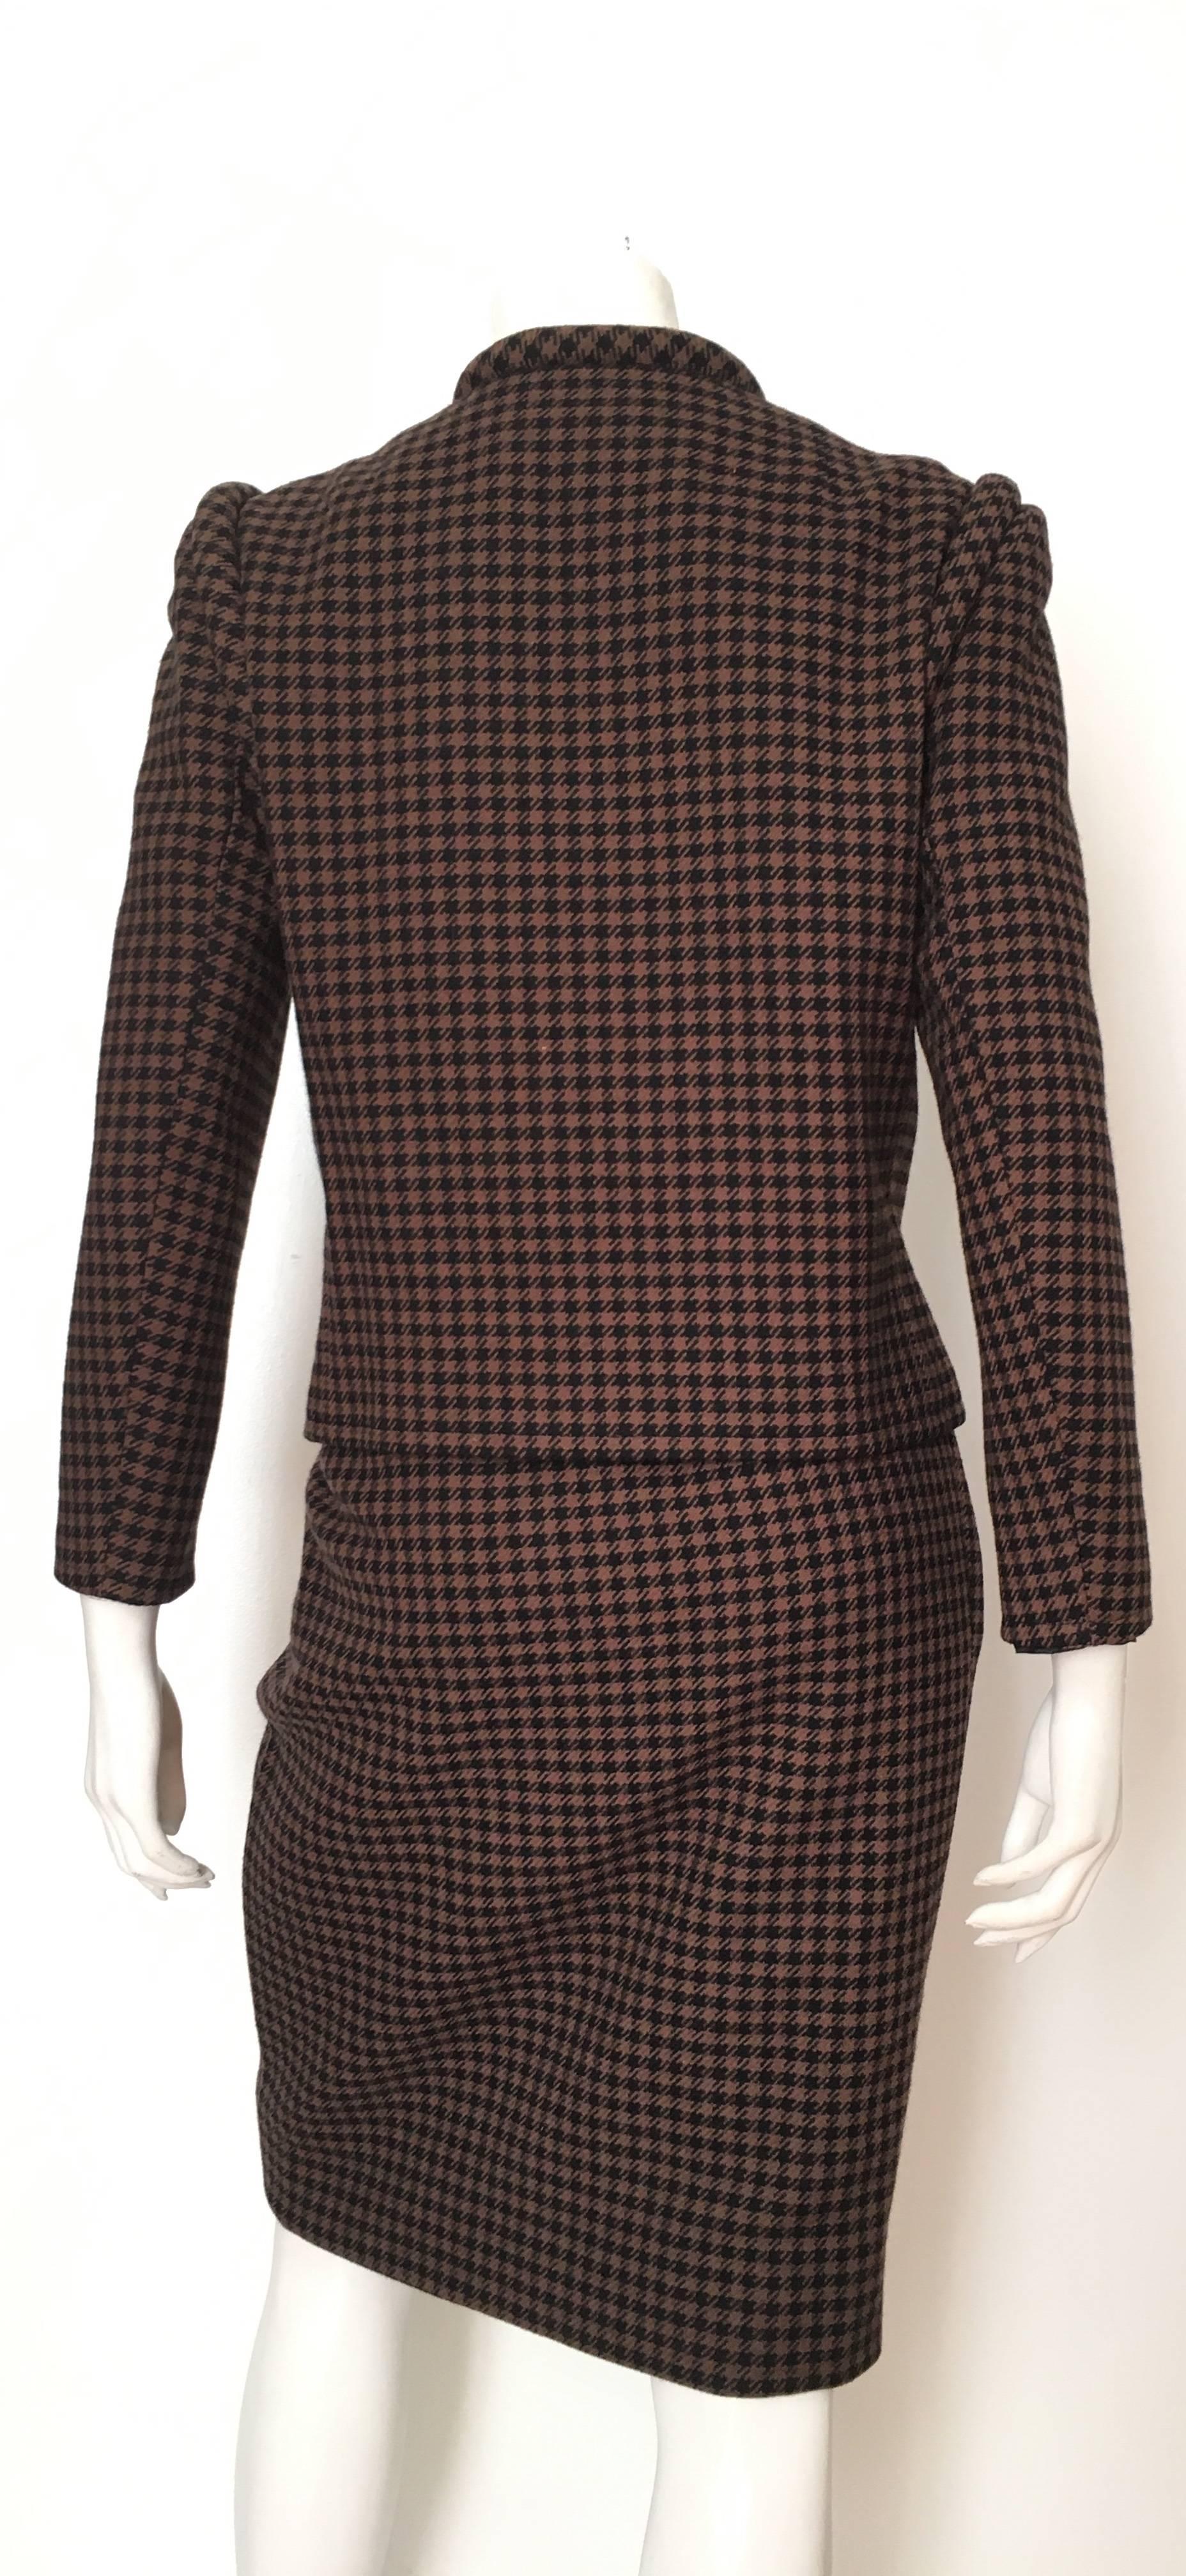 Nina Ricci 1970s Wool Brown and Black Houndstooth Jacket and Skirt Set Size 6. For Sale 1